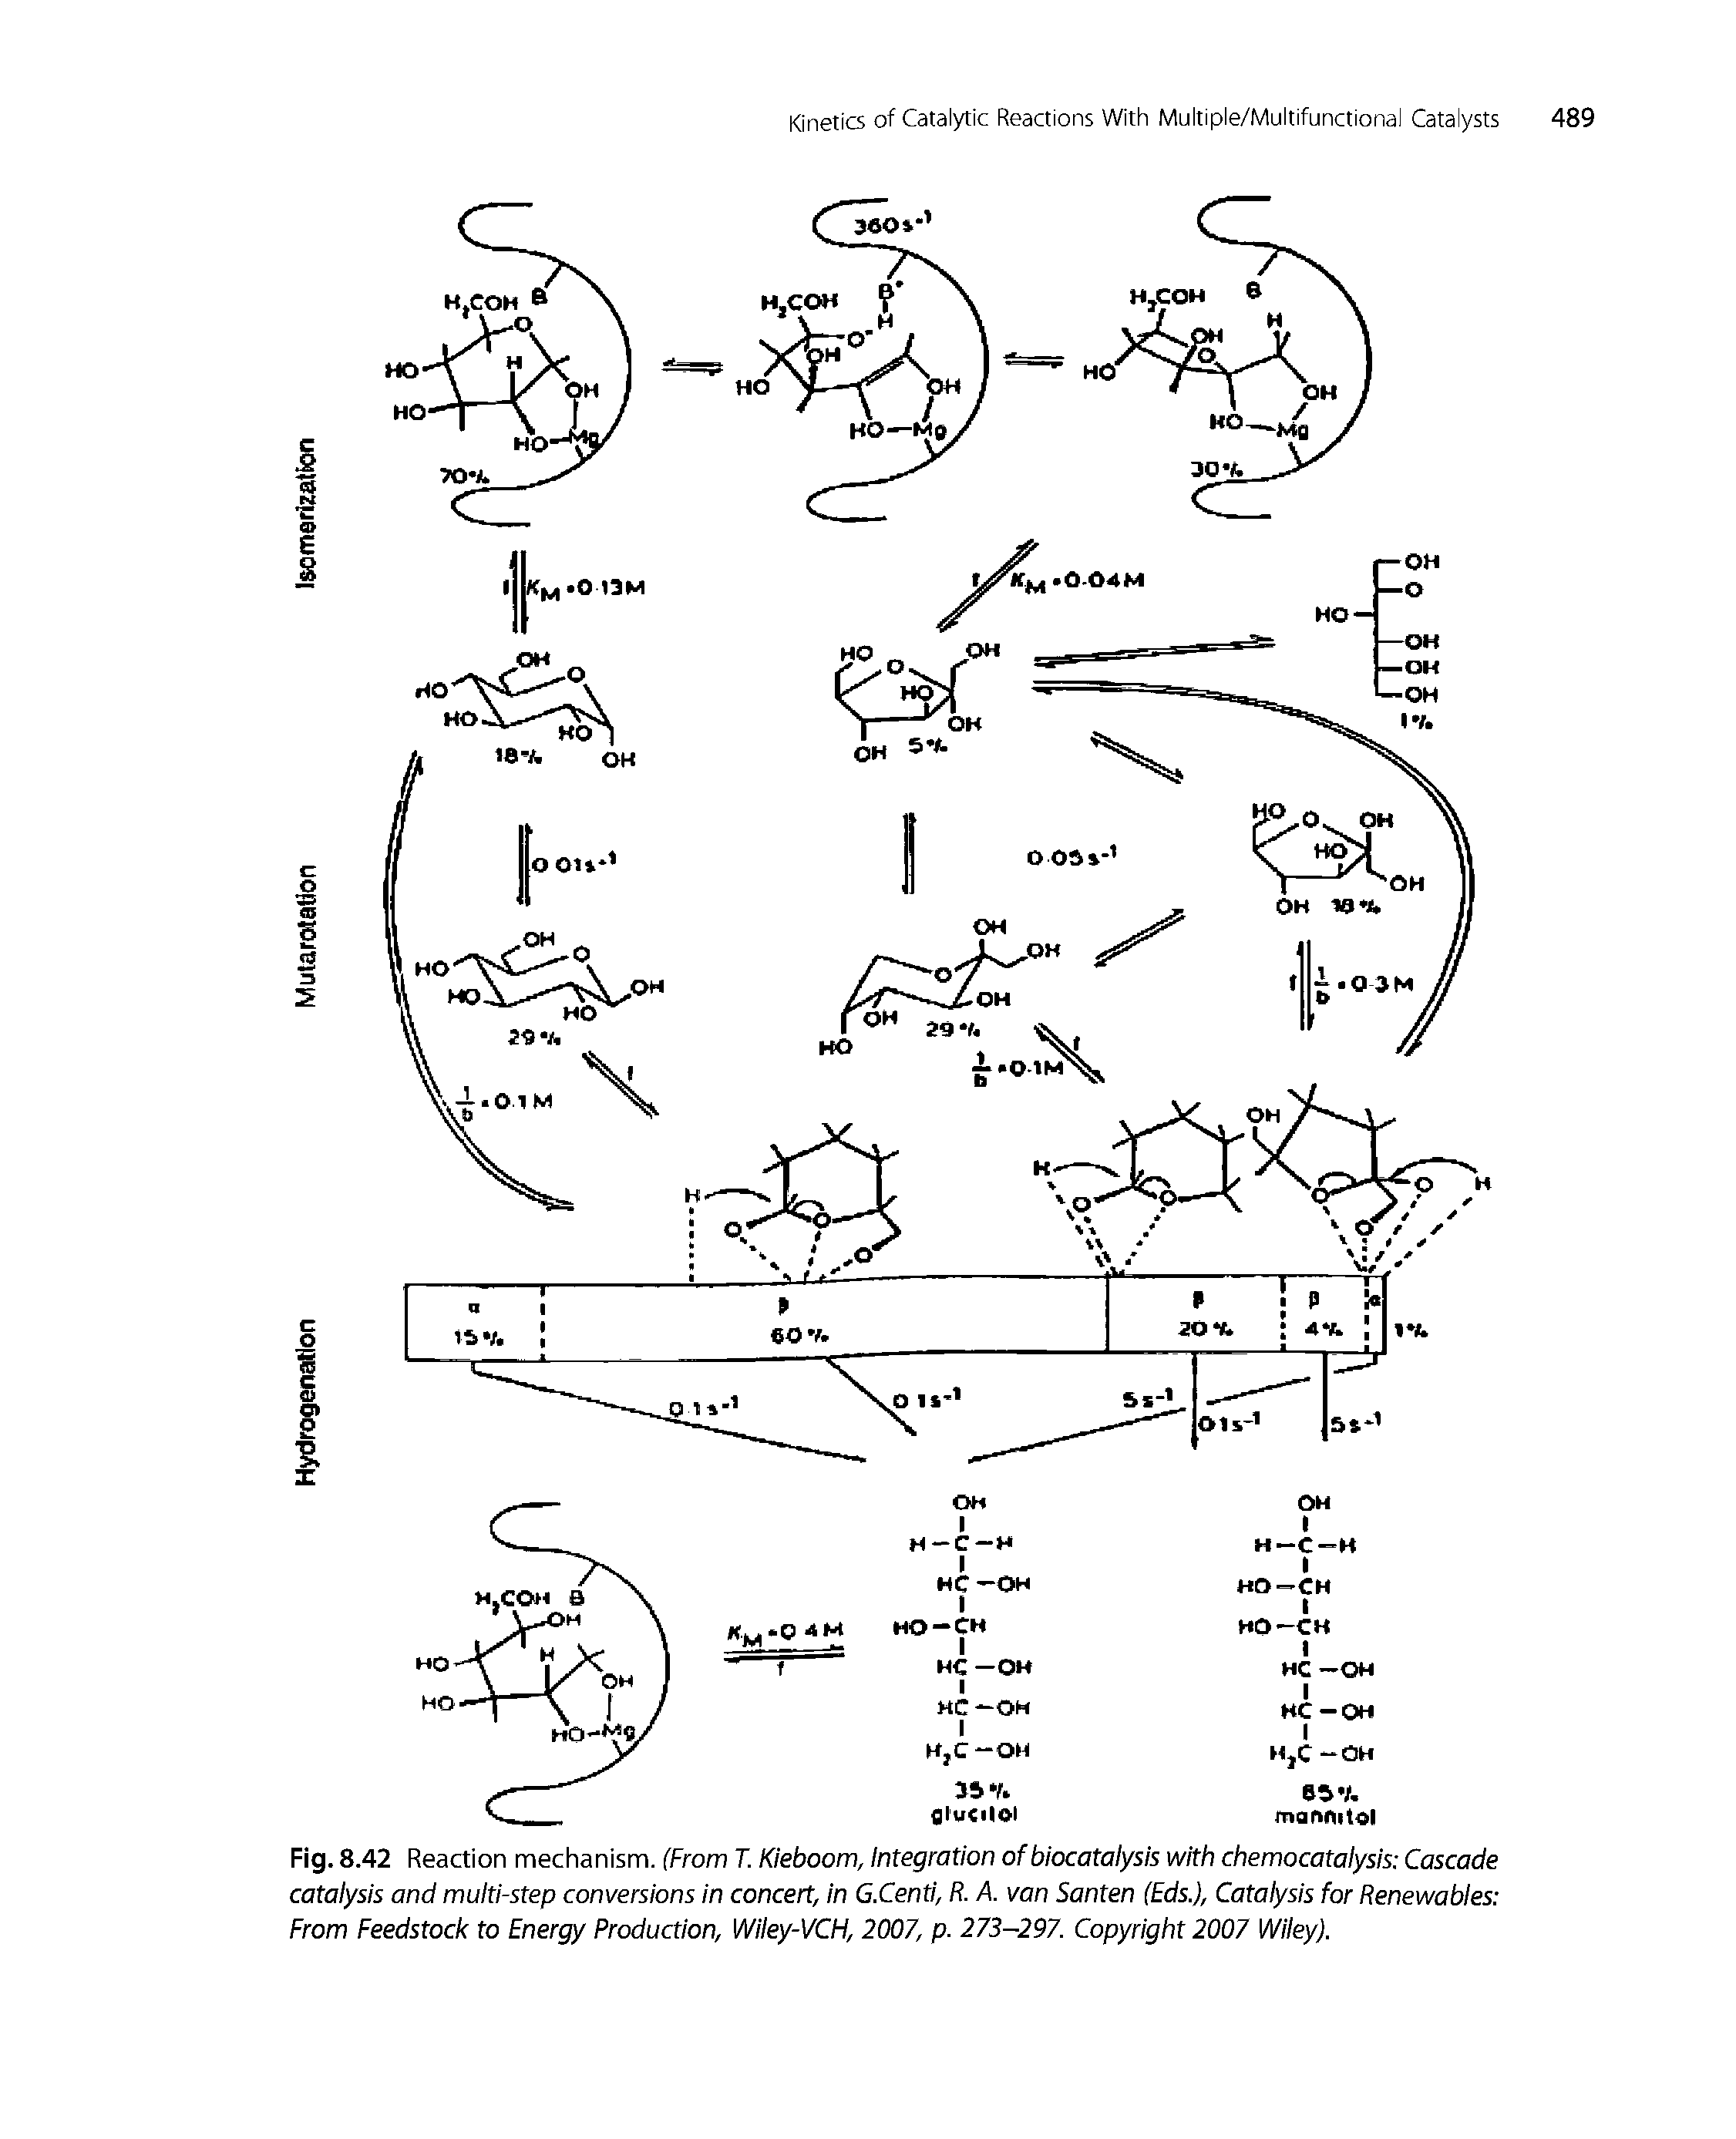 Fig. 8.42 Reaction mechanism. (From T. Kieboom, Integration of biocatalysis with chemocatalysis Cascade catalysis and multi-step conversions in concert, in G.Centi, R. A. van Santen (Eds.), Catalysis for Renewables From Feedstock to Energy Production, Wiley-VCFI, 2007, p. 273-297. Copyright 2007 Wiley).